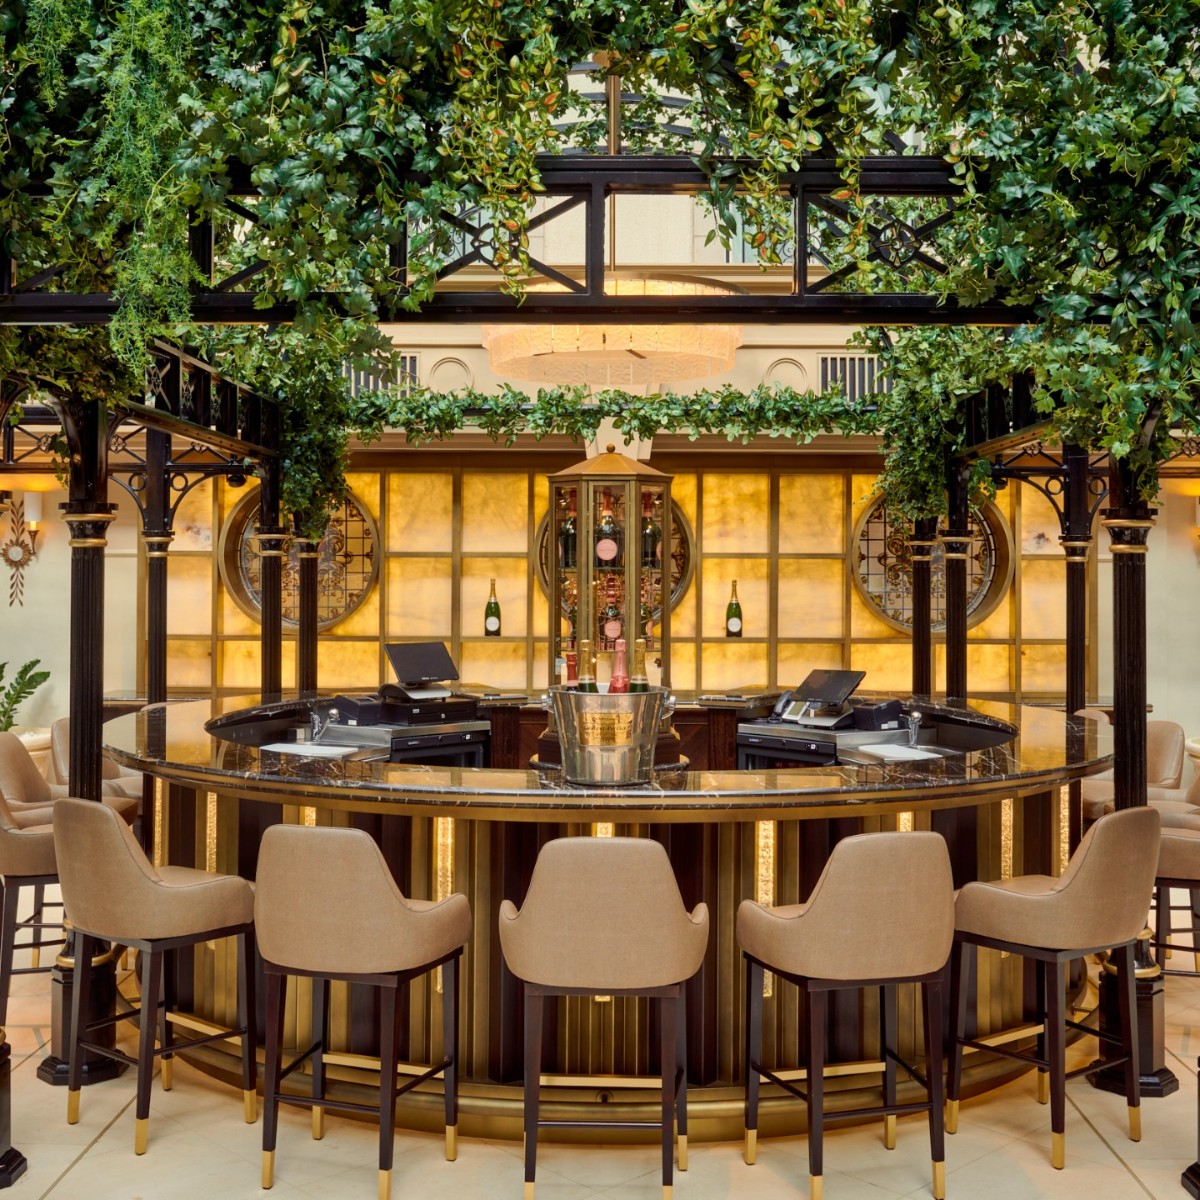 Tucked away under a botanic horizon, uncover the bustling Champagne Bar in our oasis of luxury 🍾 Join us for a Champagne infused soirée served up with Caviar tastings, coastal-inspired delicacies and echoes of live piano. #TheLandmarkLondon #LHWTraveler #Champagne